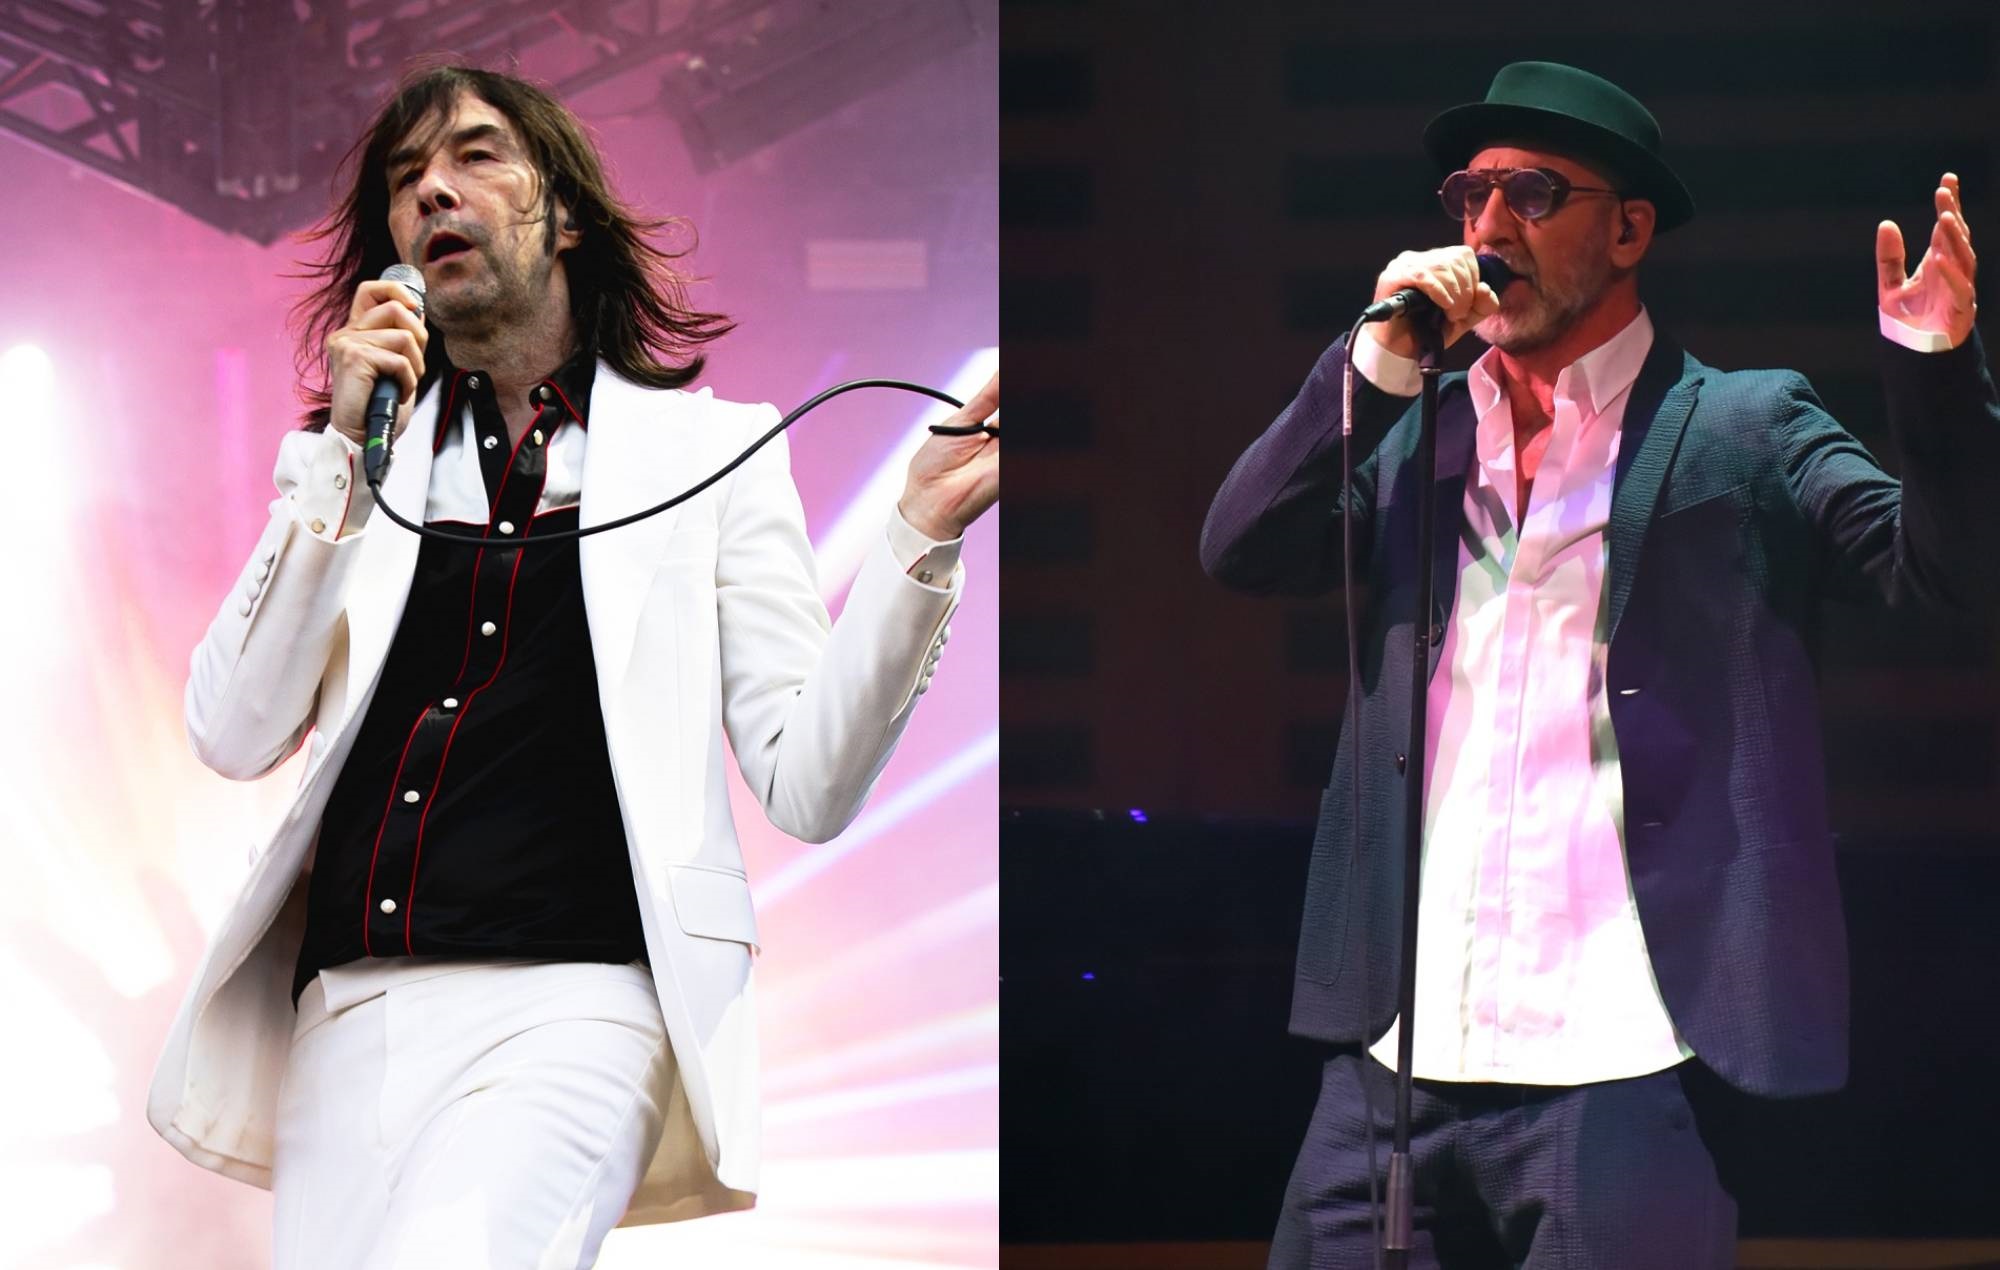 Watch Primal Scream's Bobby Gillespie join Eric Cantona on stage to sing song ex-footballer penned for Palestine